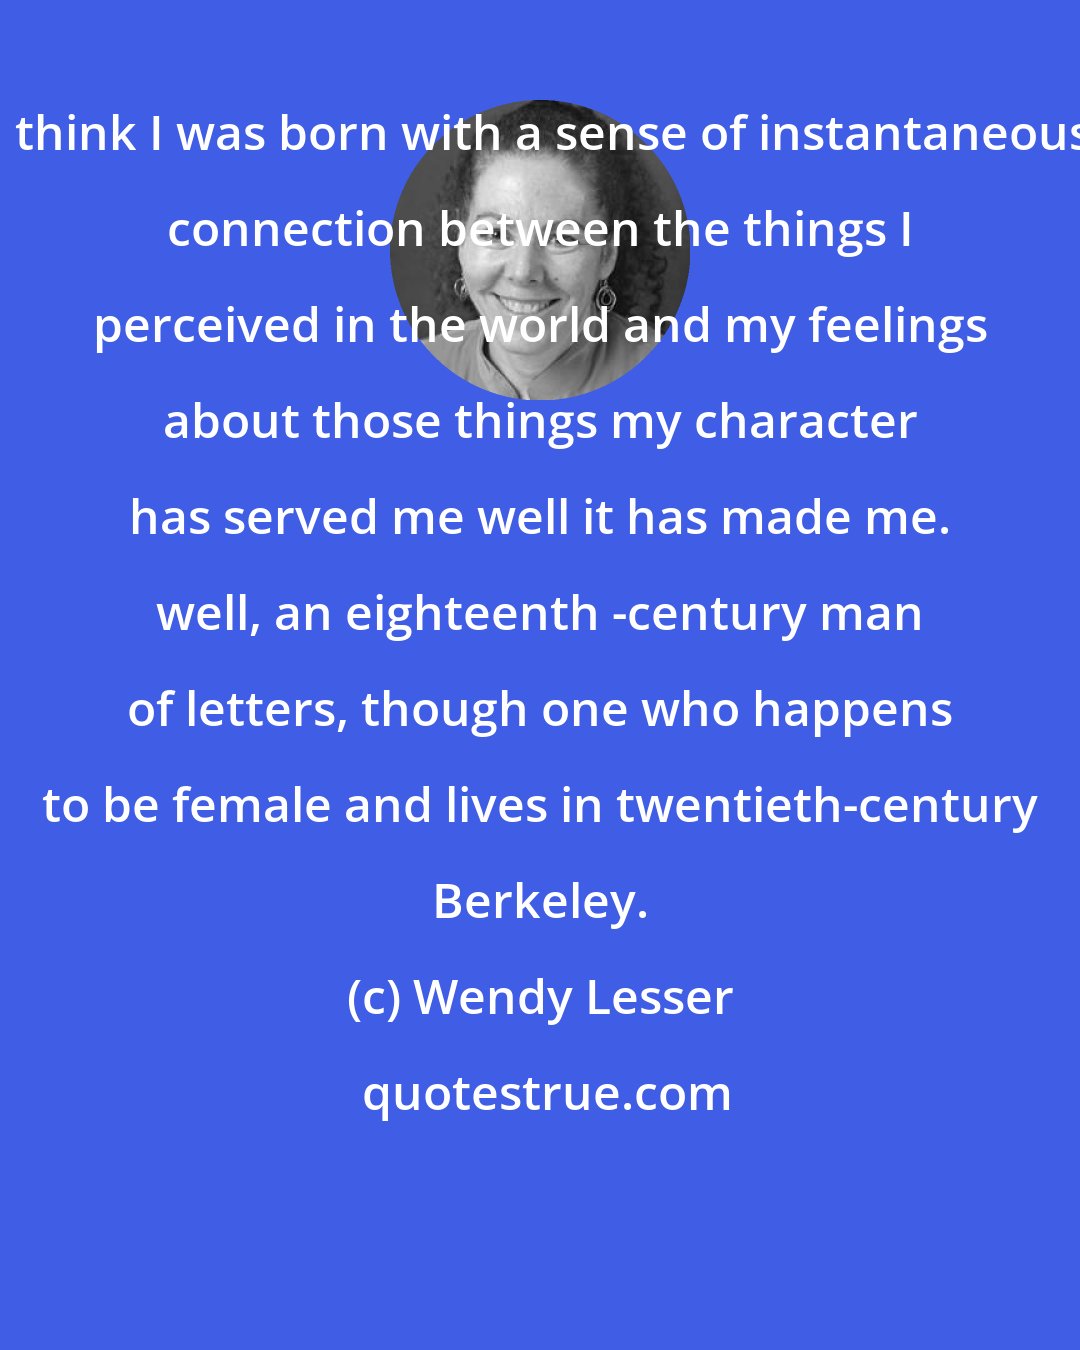 Wendy Lesser: I think I was born with a sense of instantaneous connection between the things I perceived in the world and my feelings about those things my character has served me well it has made me. well, an eighteenth -century man of letters, though one who happens to be female and lives in twentieth-century Berkeley.